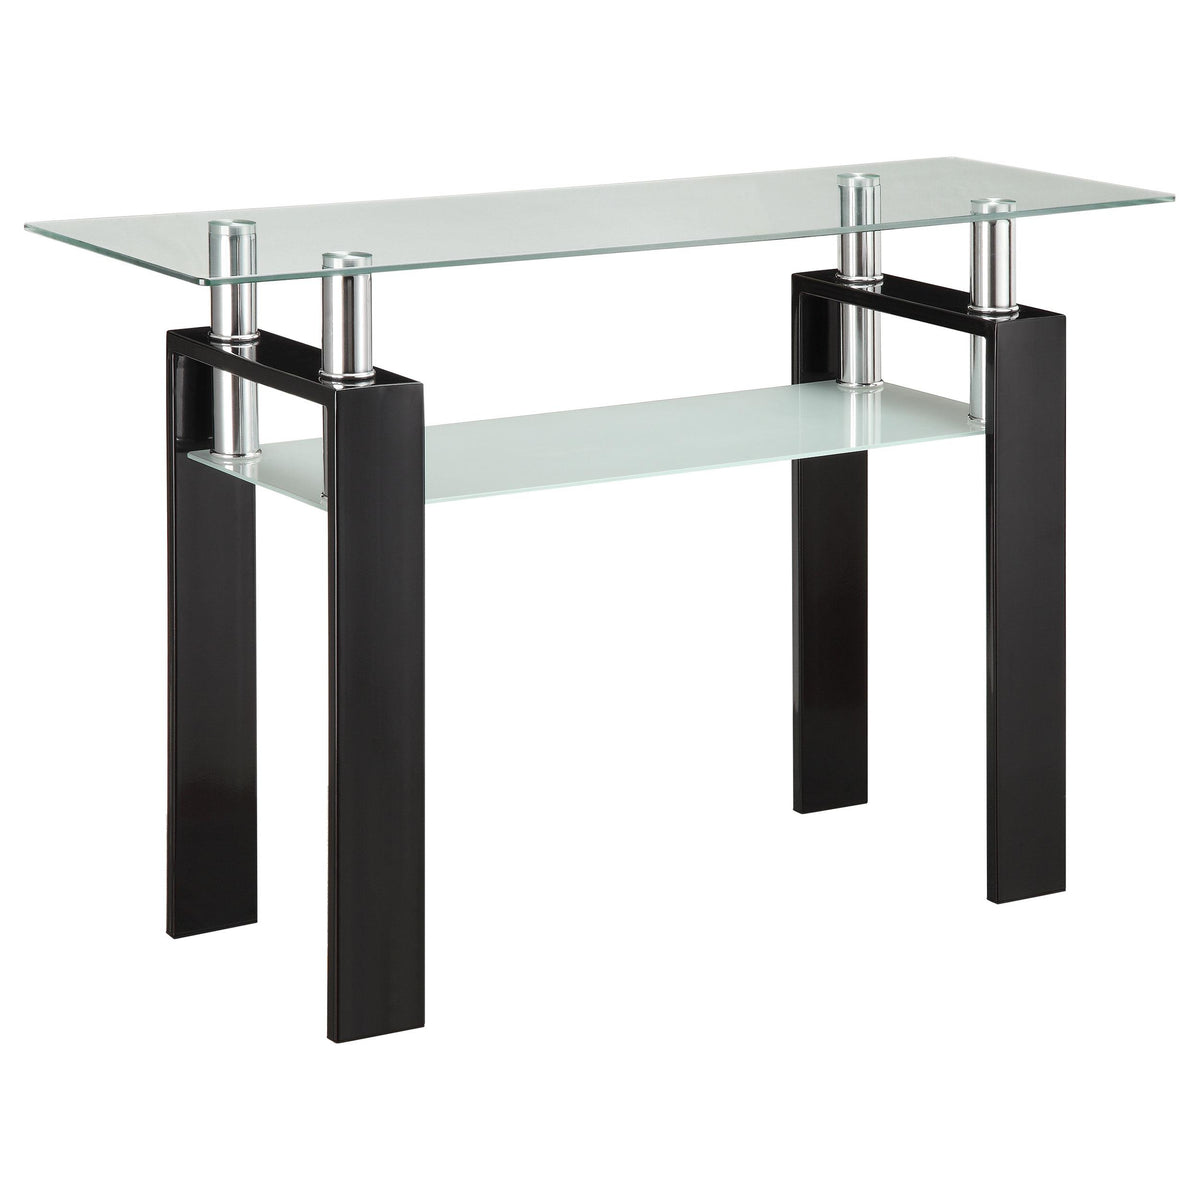 Dyer Tempered Glass Sofa Table with Shelf Black  Las Vegas Furniture Stores